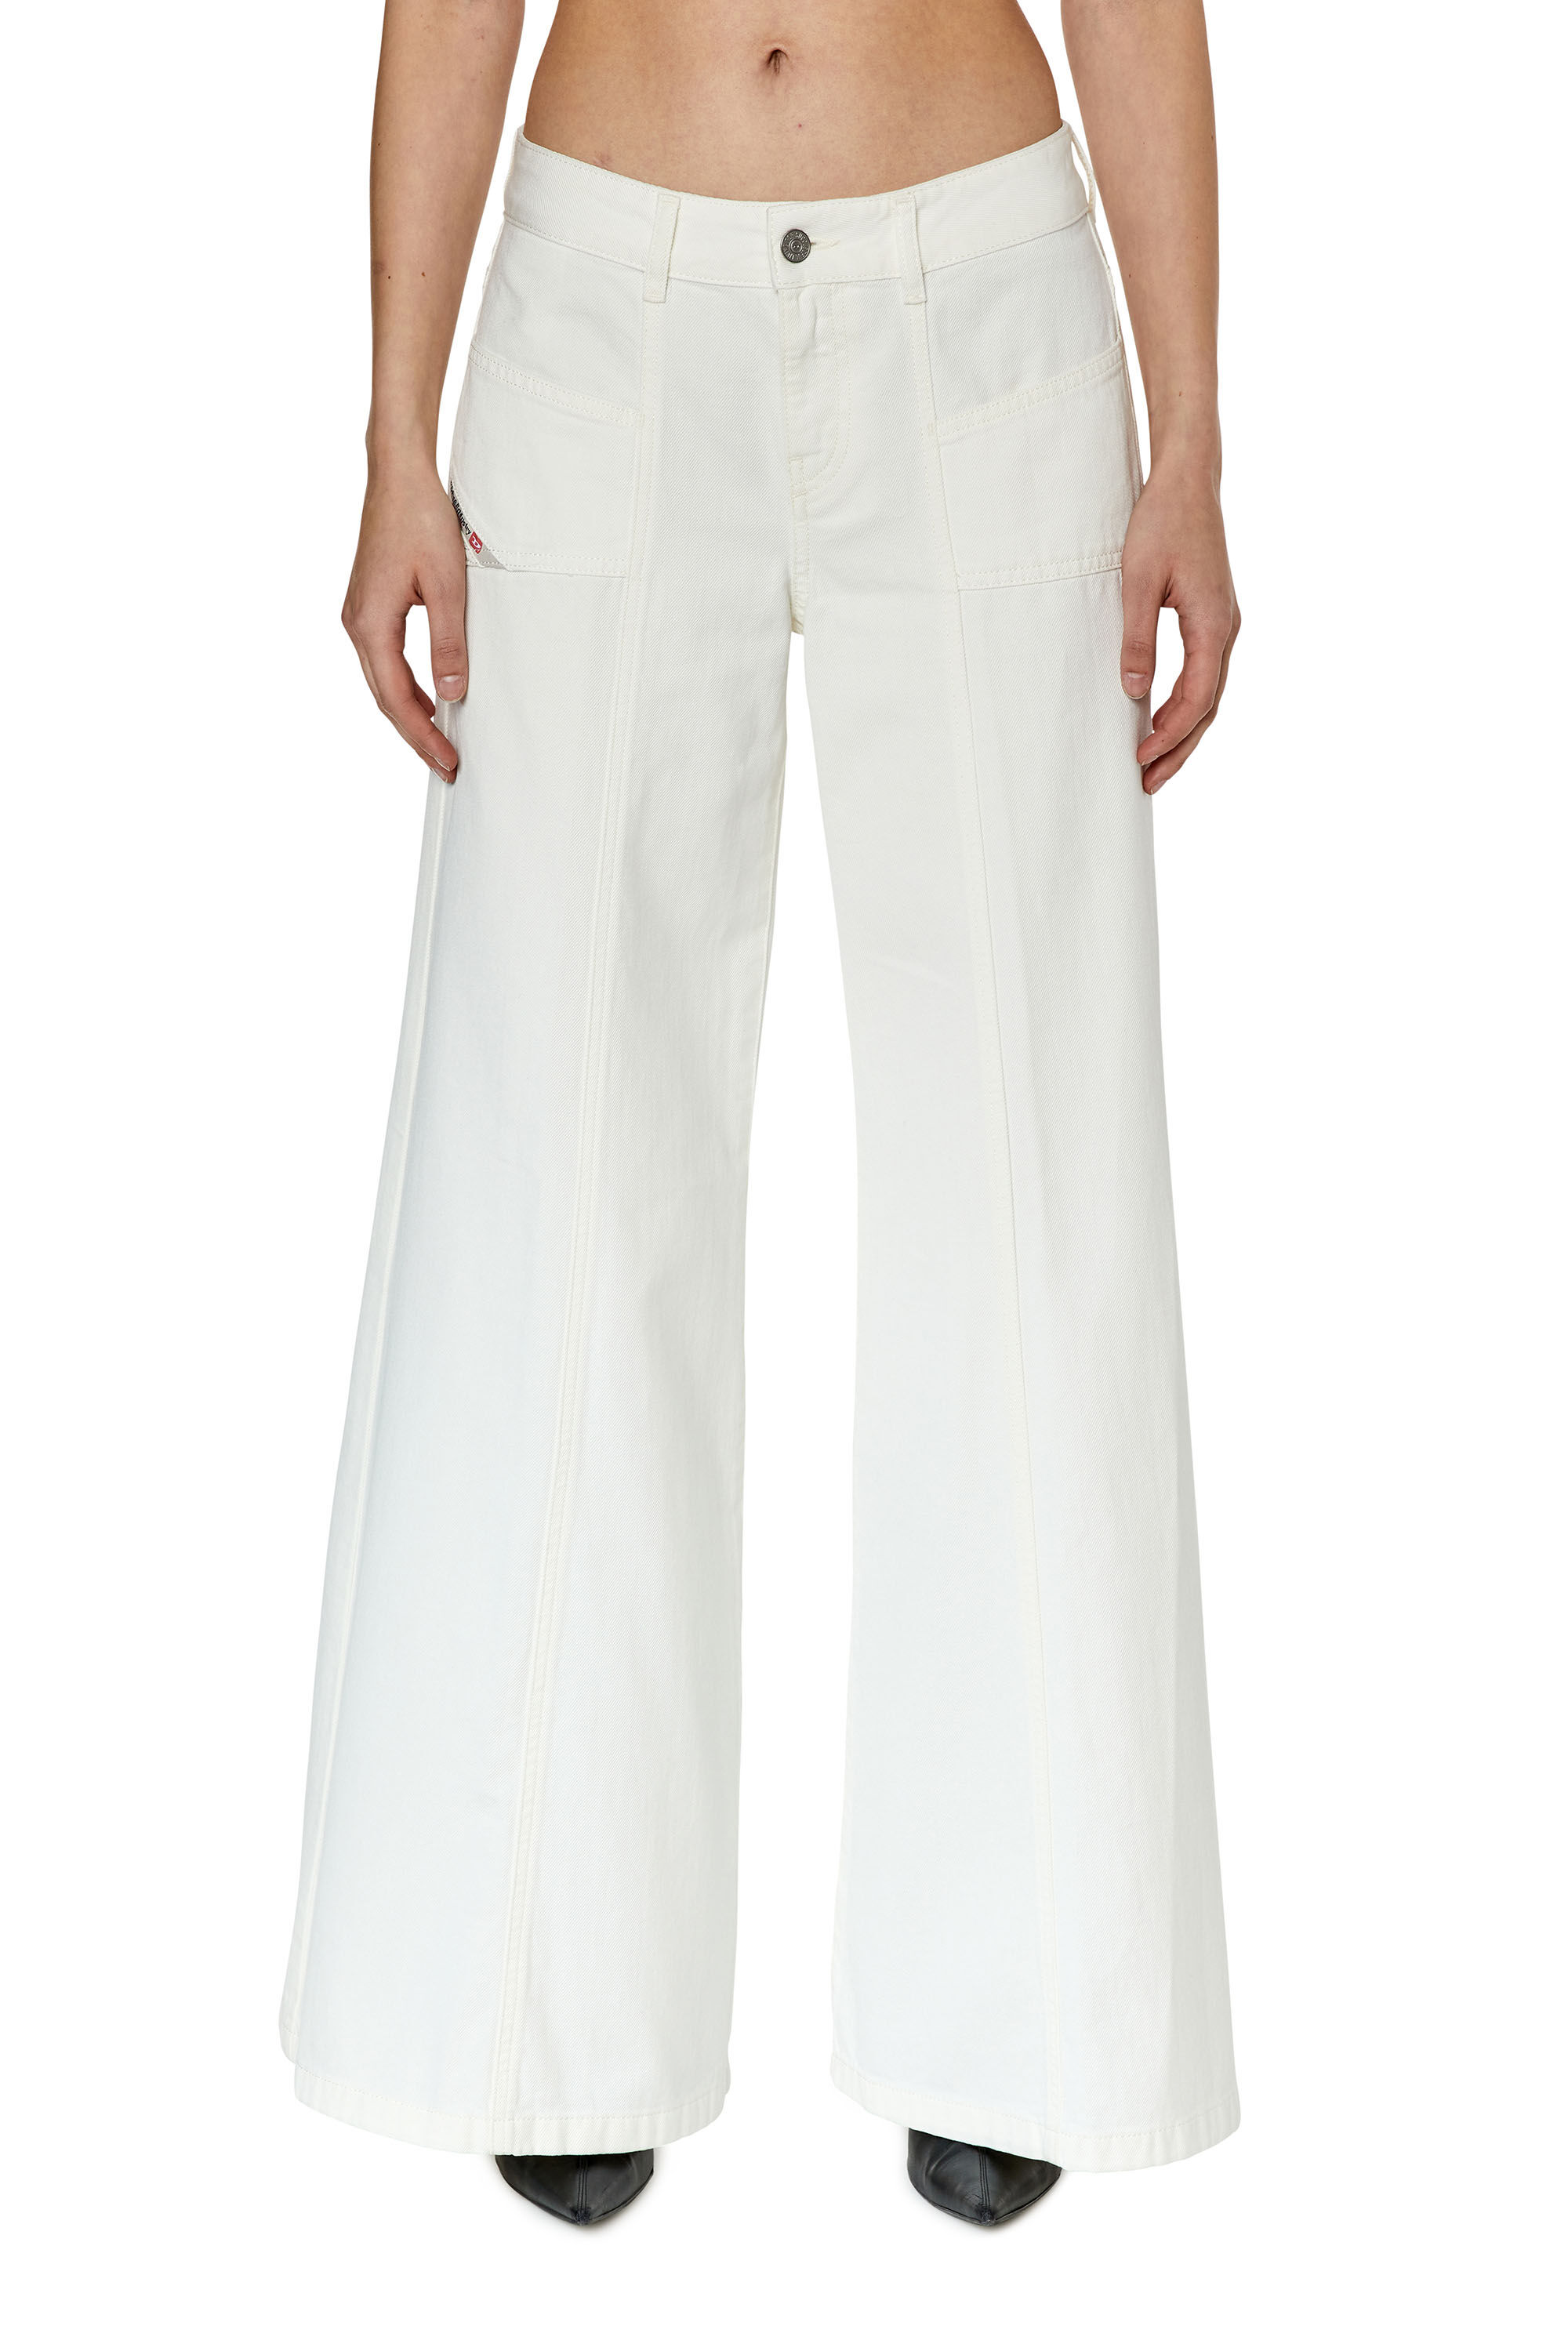 Women's Bootcut and Flare Jeans, White